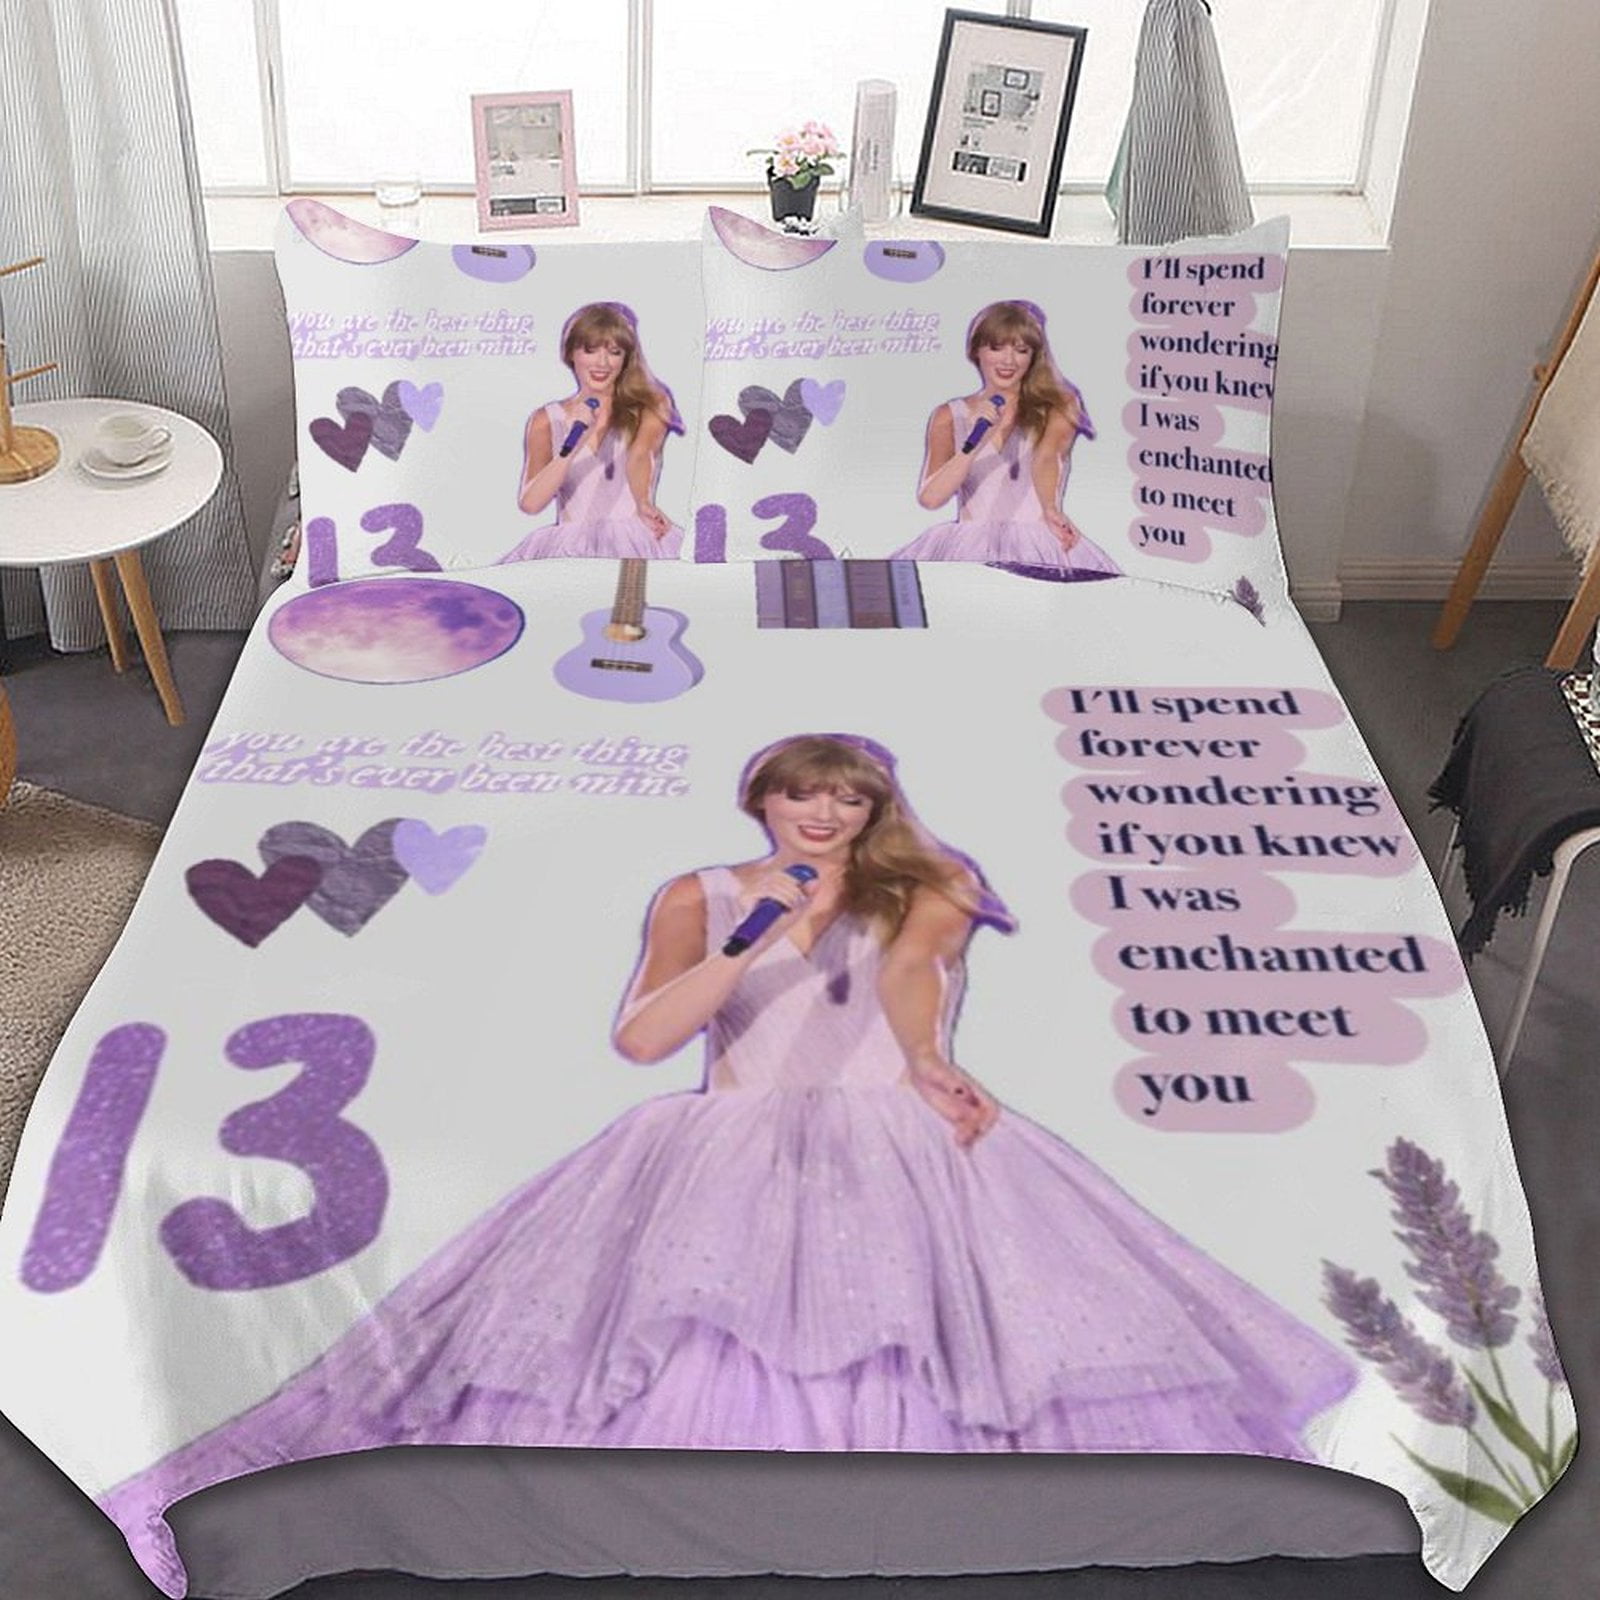 Taylor Swift Singer 4 3 Pieces Bedding Sets Soft Comforter Sets Decor Bedroom Gifts with 1 Duvet Cover 2 Pillowcases, Size: 90 x 90